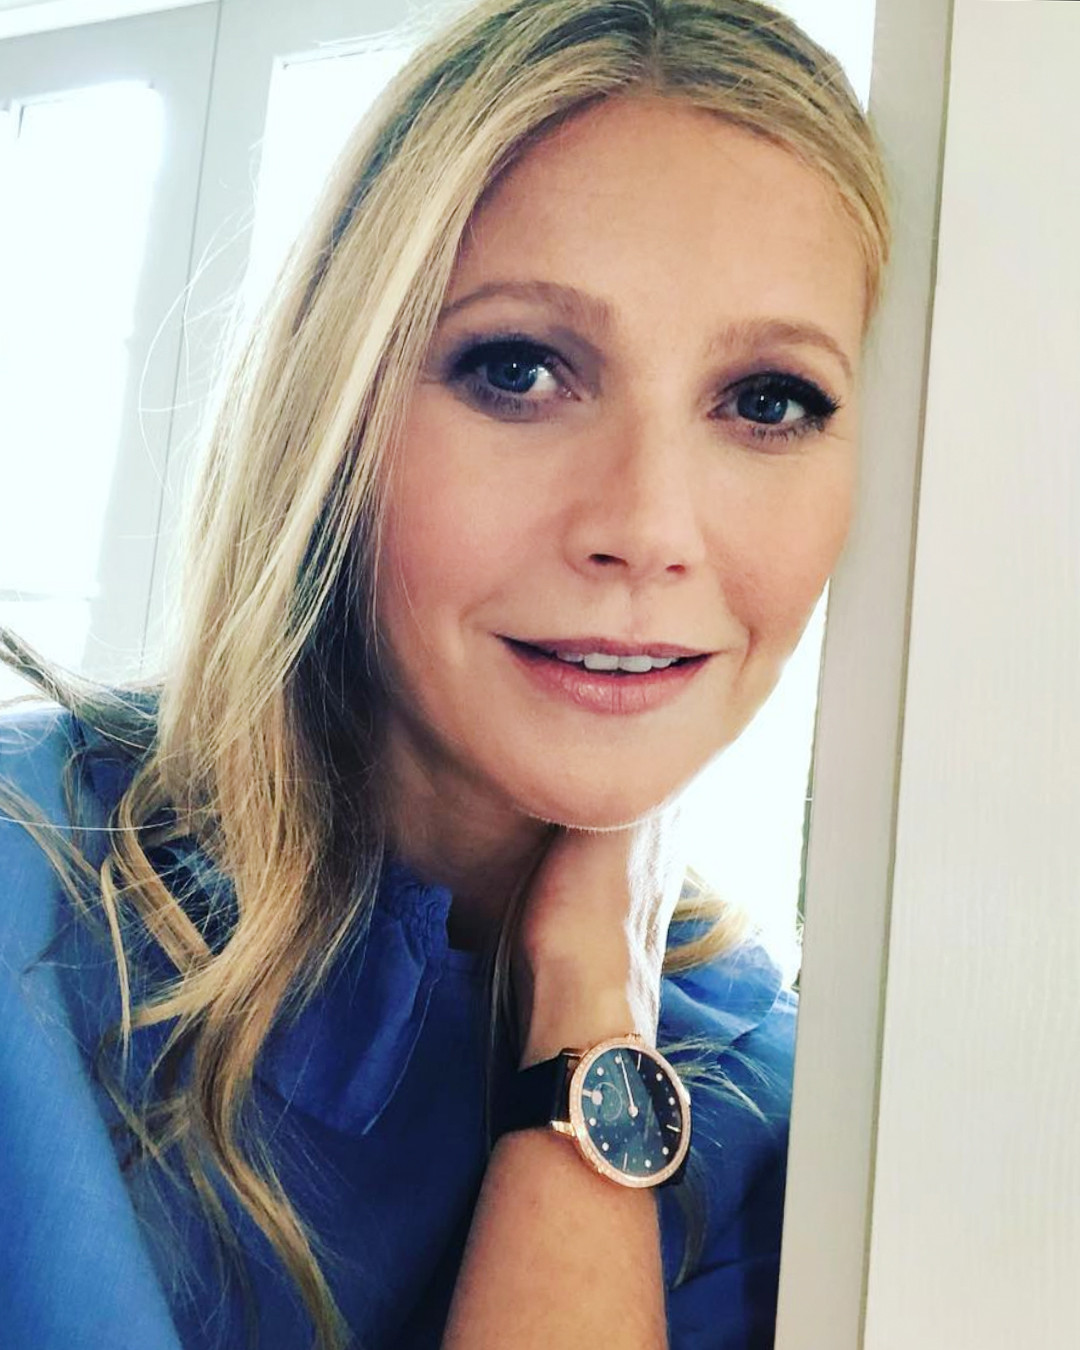 Plaske gentage ikke noget How Does Gwyneth Paltrow's $600 Skin Routine Compare to Other Celebs'? - E!  Online